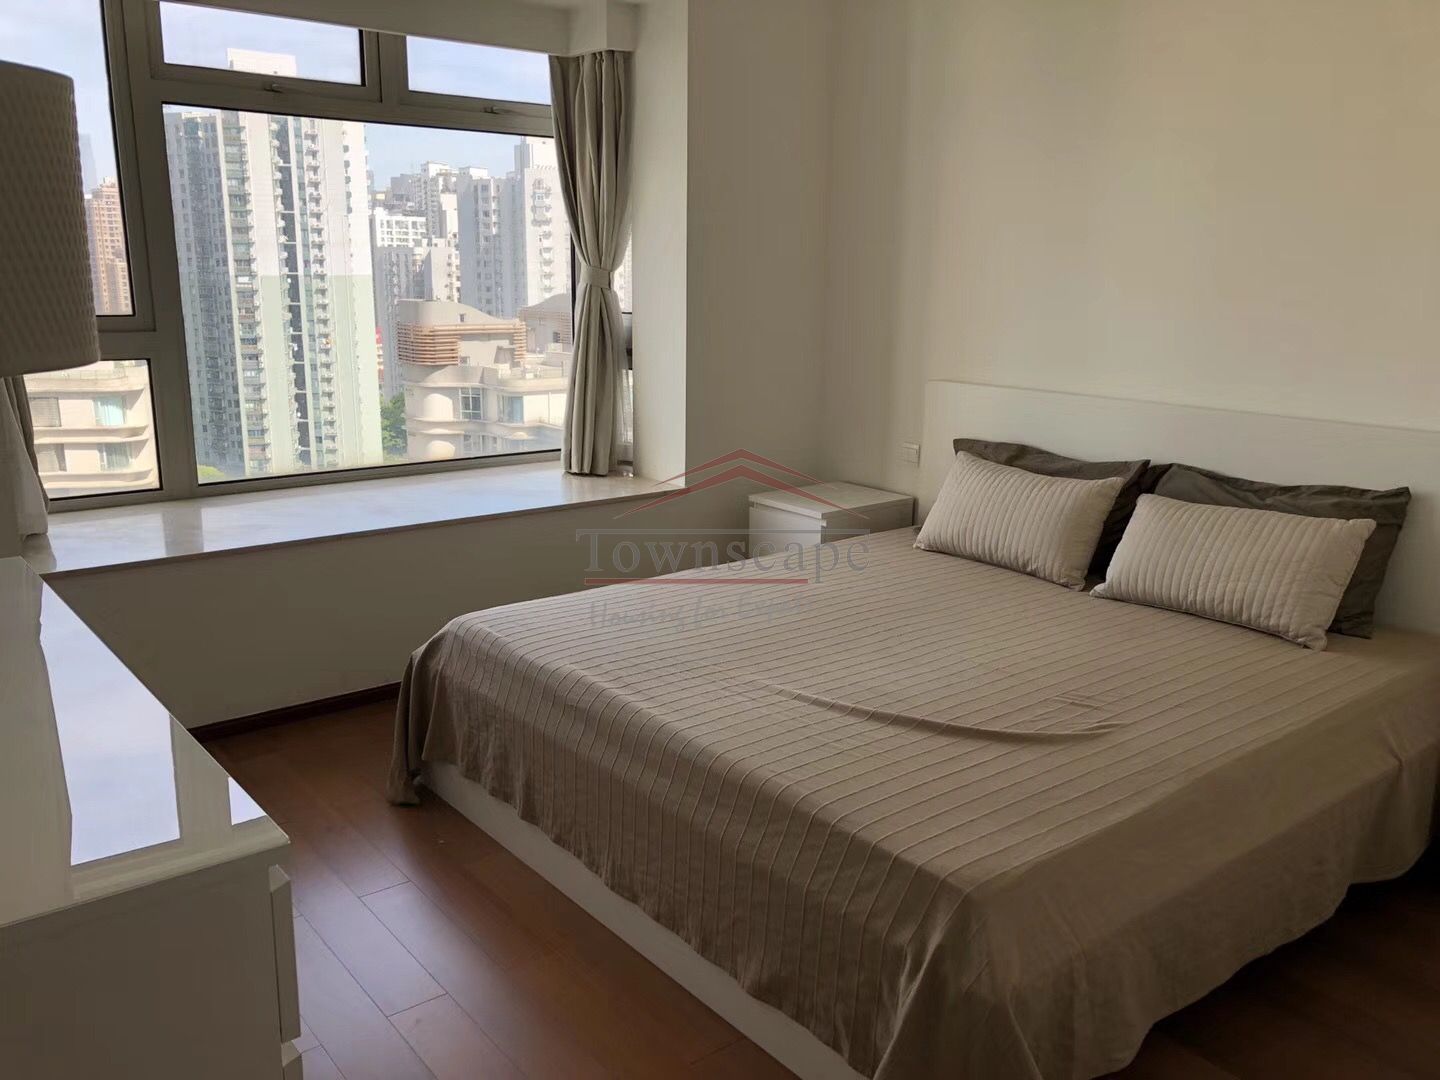  Modern 2BR Apartment with Floor Heating at Suzhou Creek